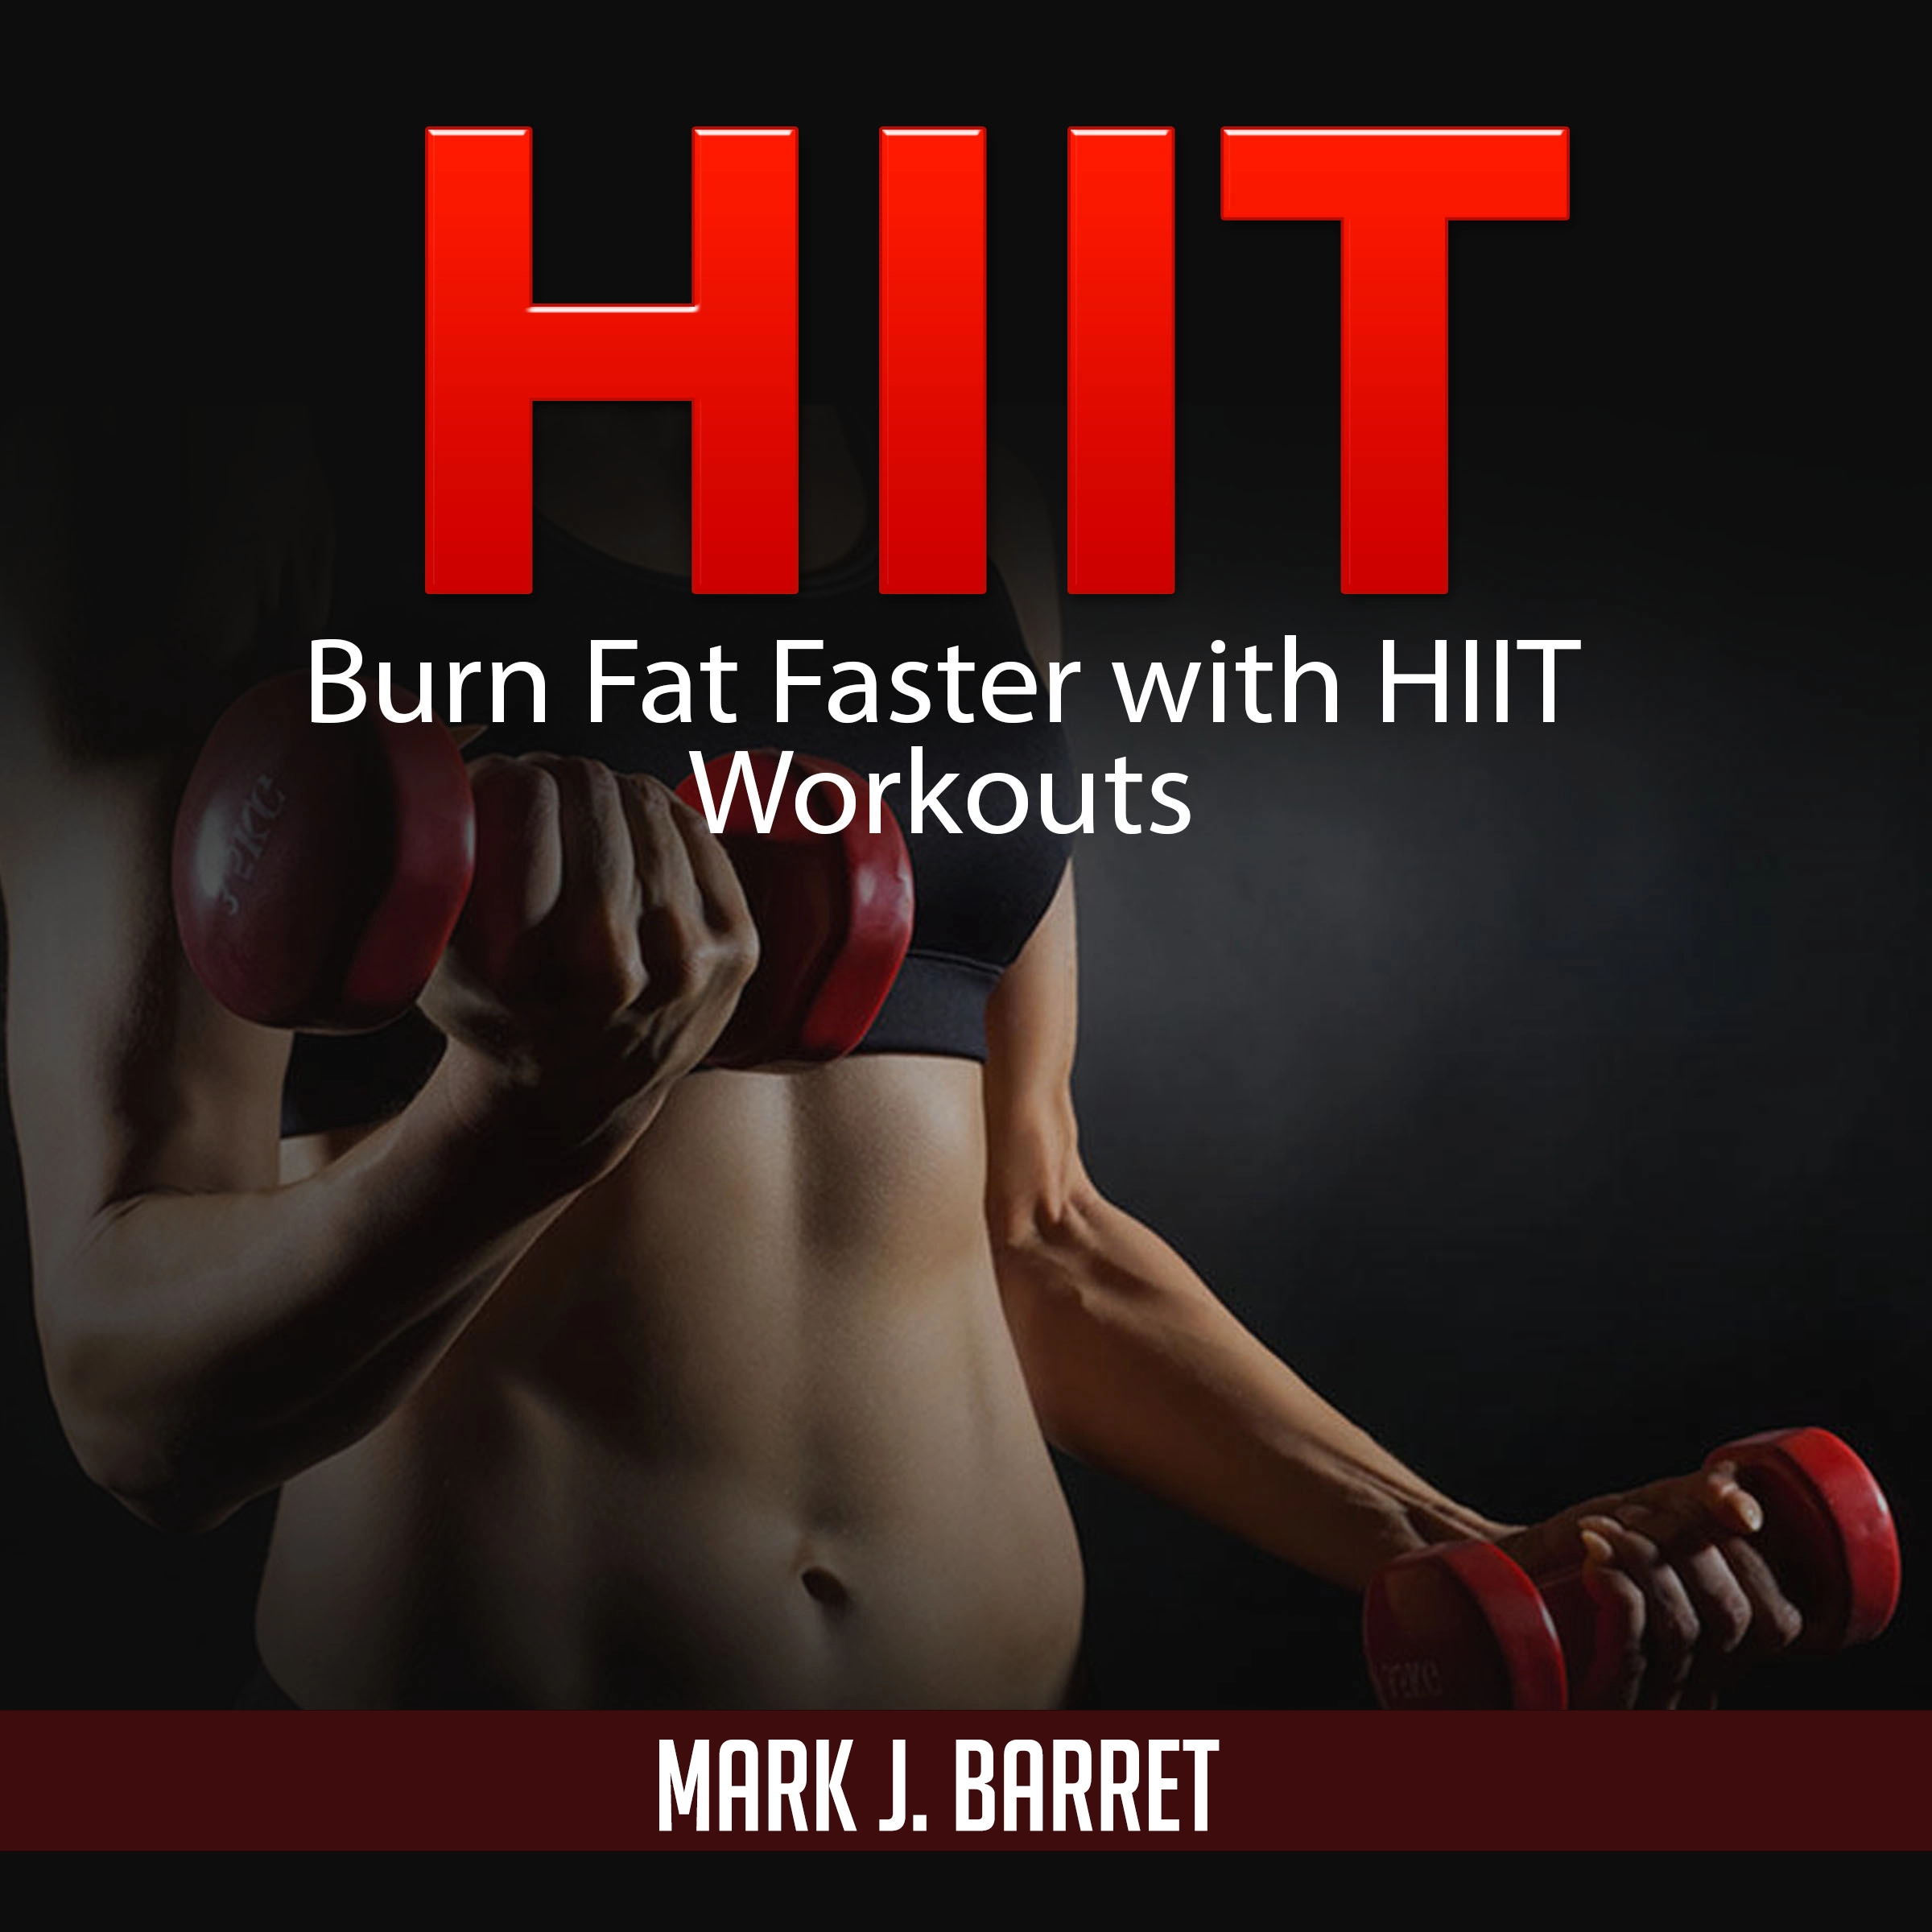 Hiit: Burn Fat Faster with HIIT Workouts Audiobook by Mark J. Barret